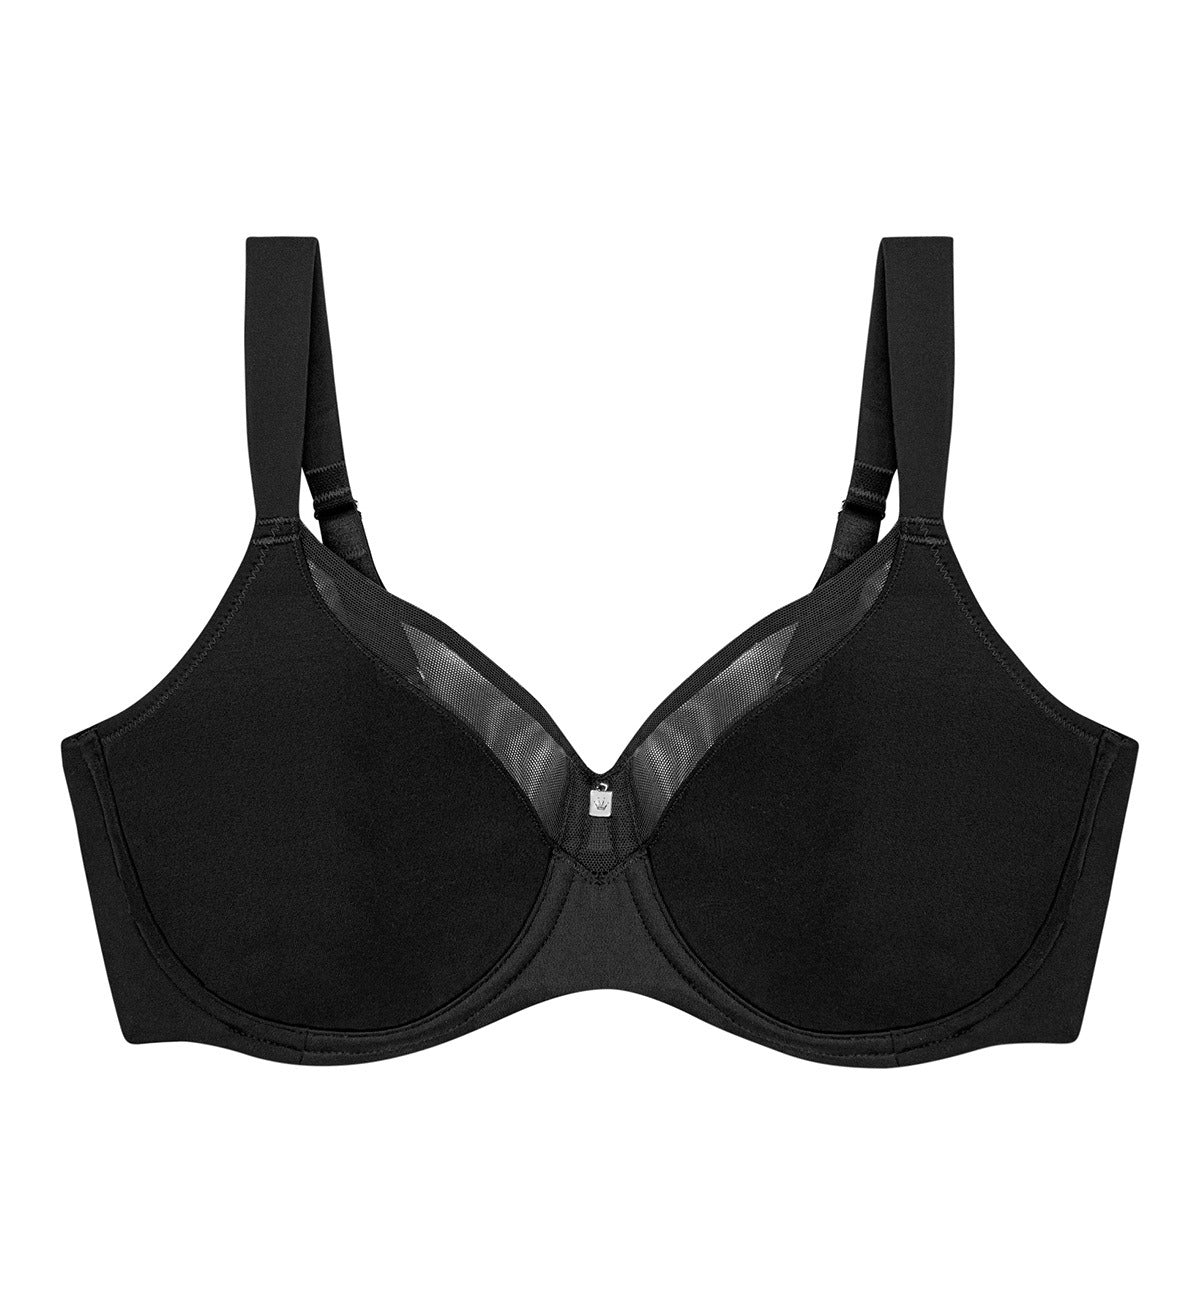 Berlei Lingerie - Our B581 Underwired Minimiser Bra is trusted to provide  great support in a full coverage wired shape. Check out our B581 Underwired Minimiser  Bra in the link